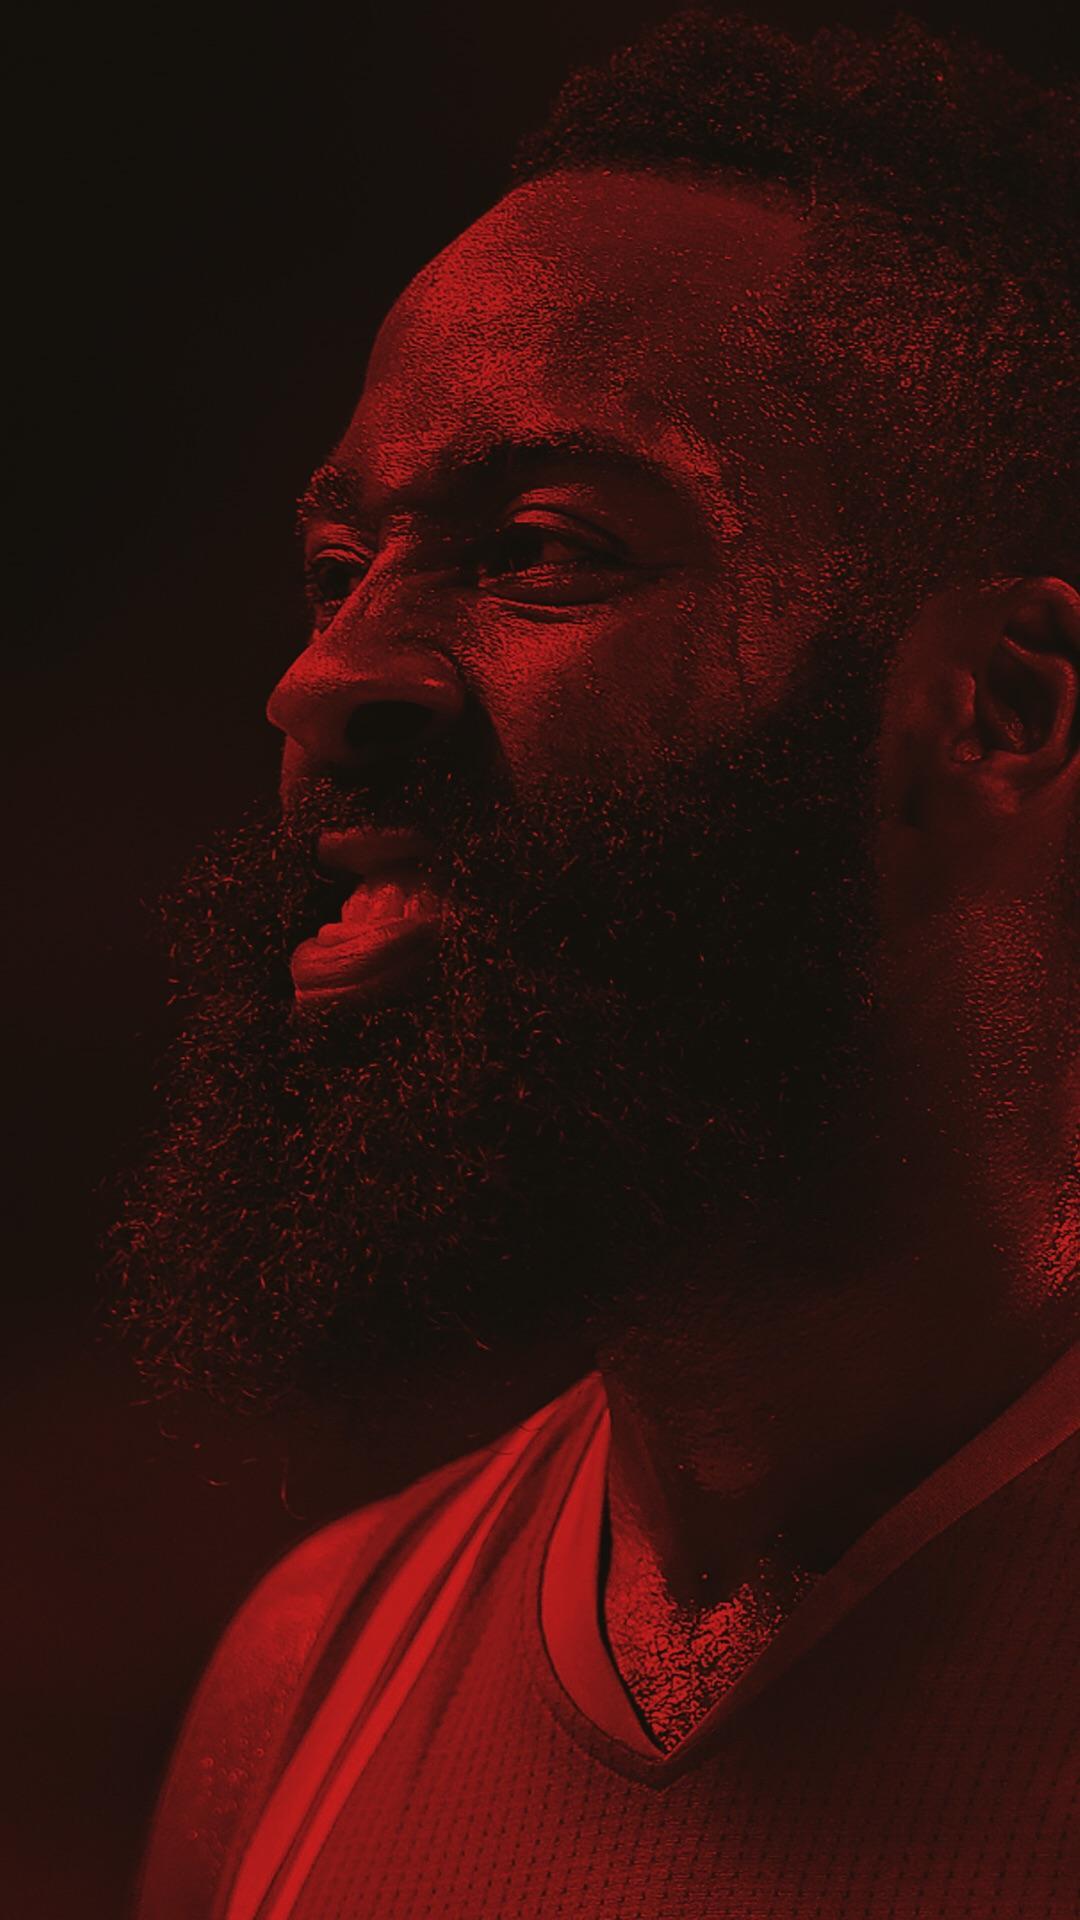 Made a James Harden wallpaper for my iPhone 6 720x1280